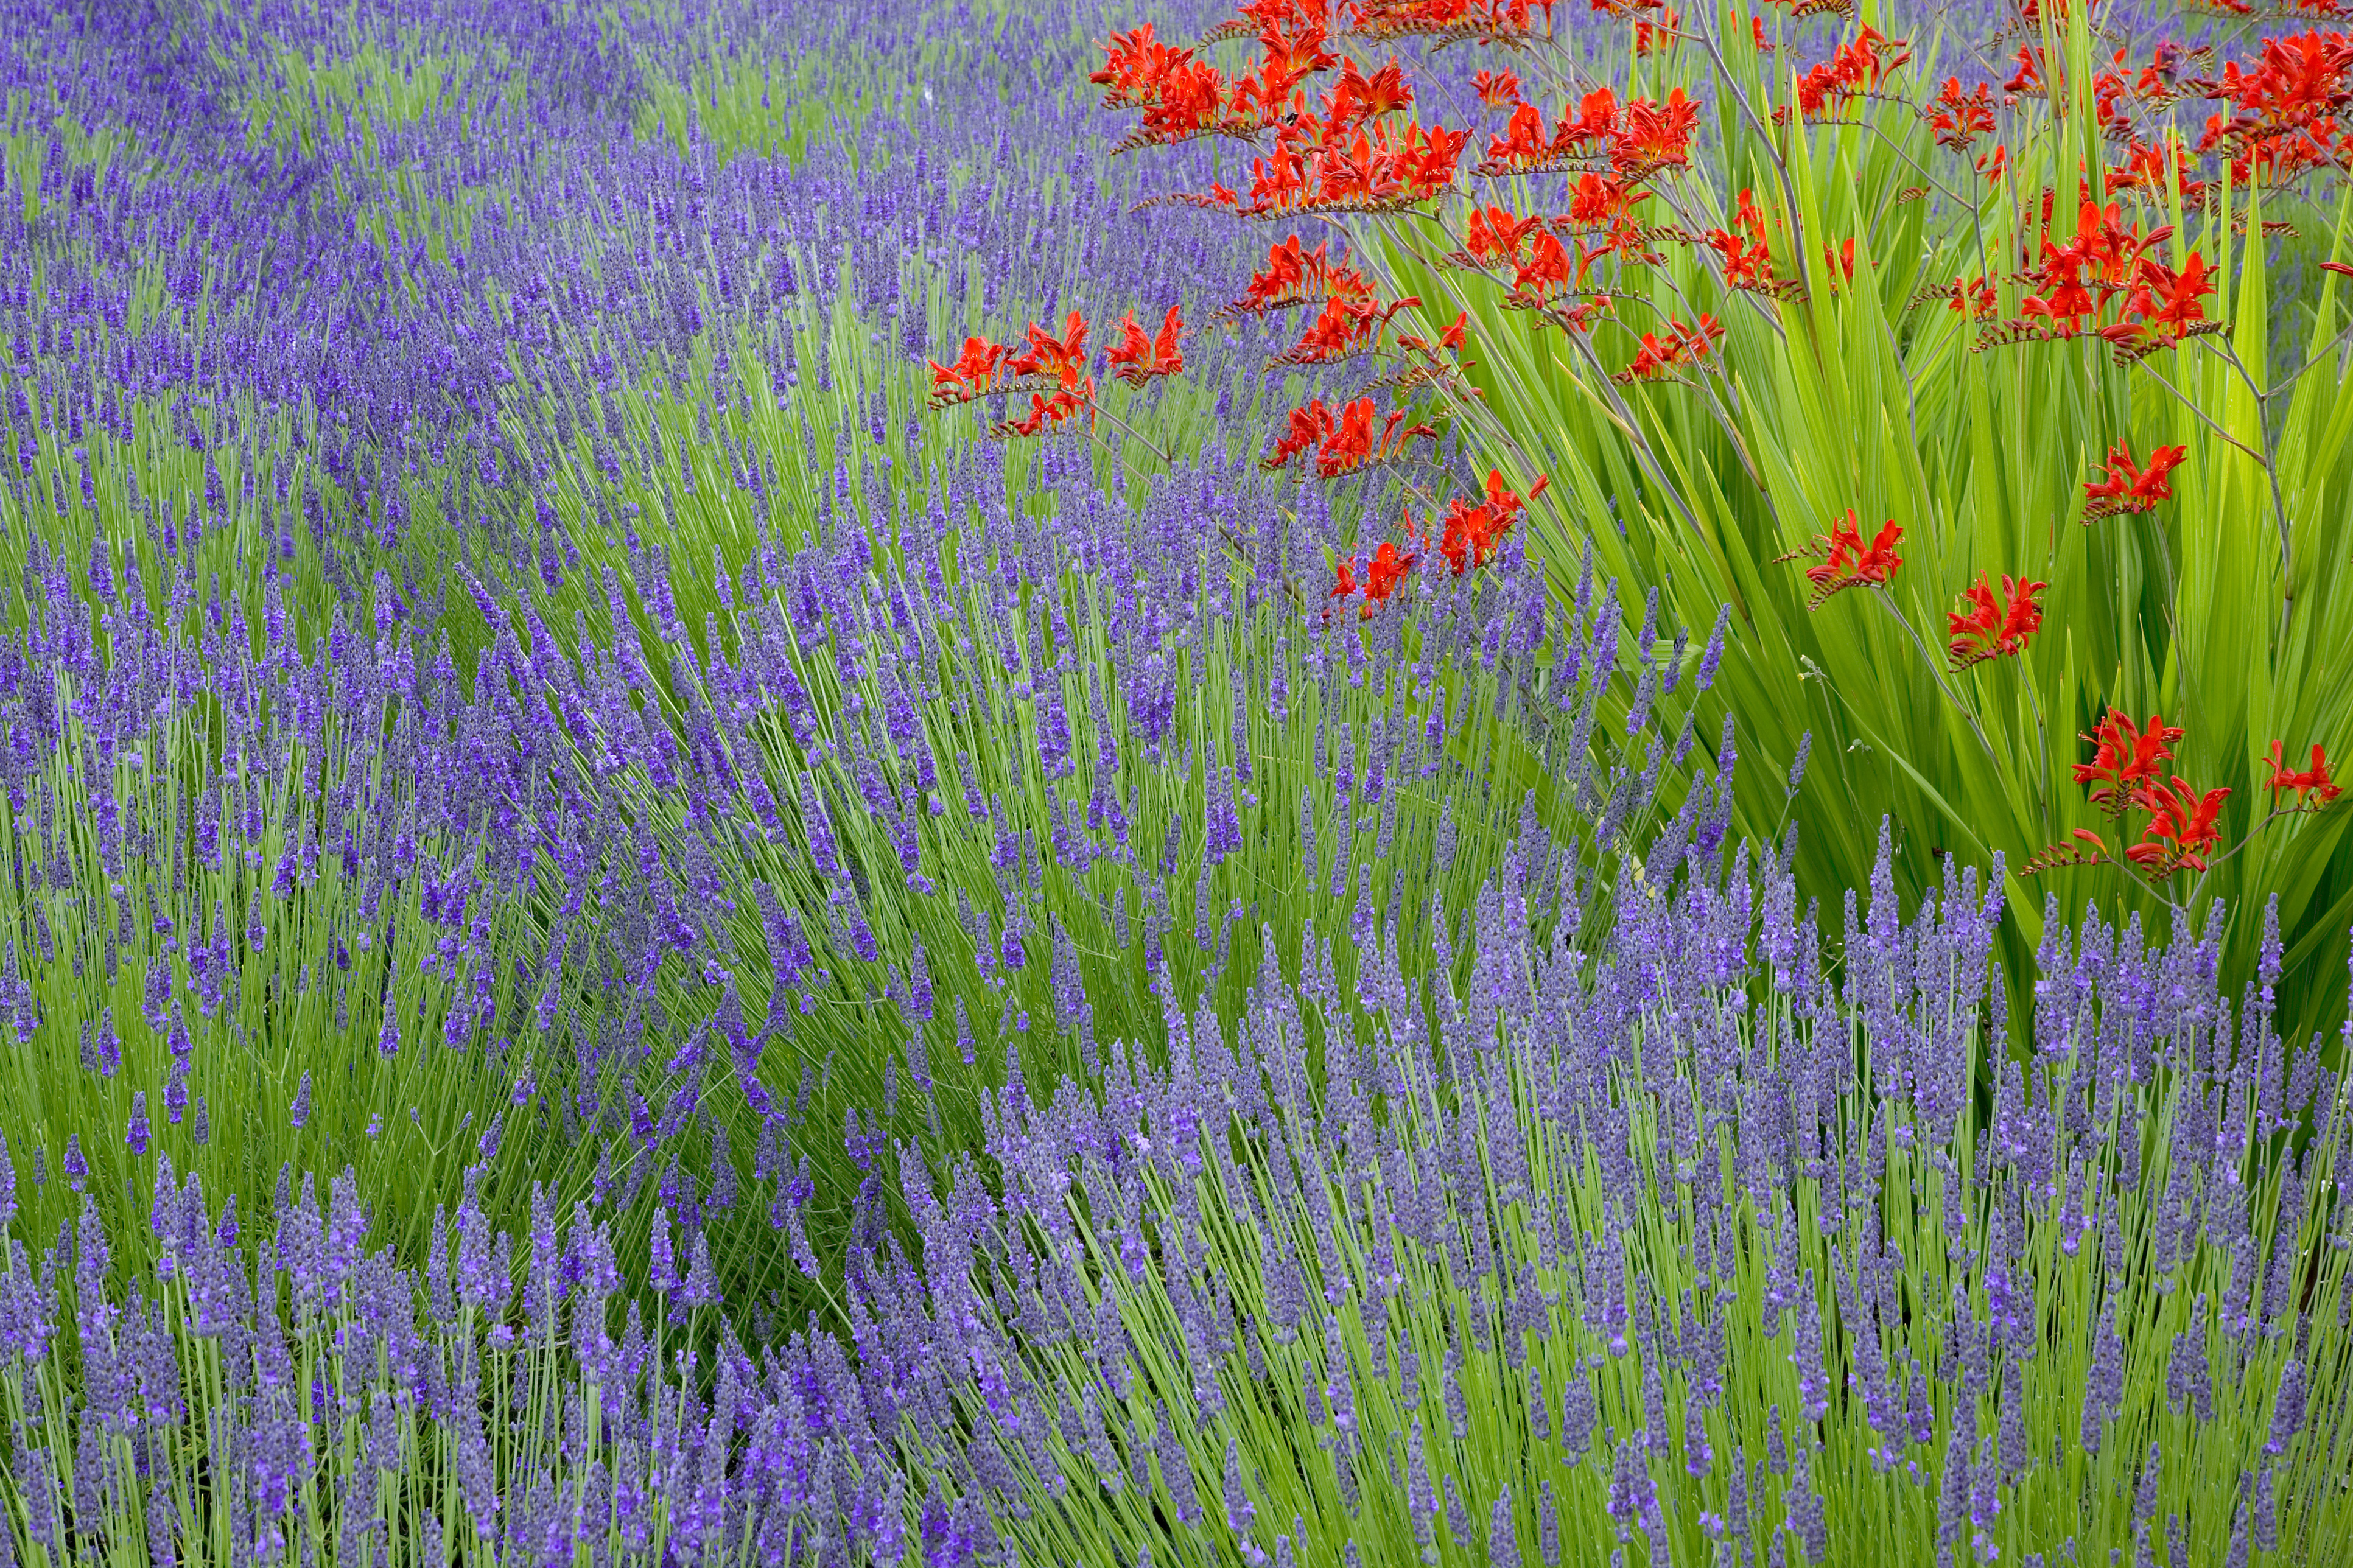 Lavender and crocosmia flowers contrast well (Thinkstock/PA)